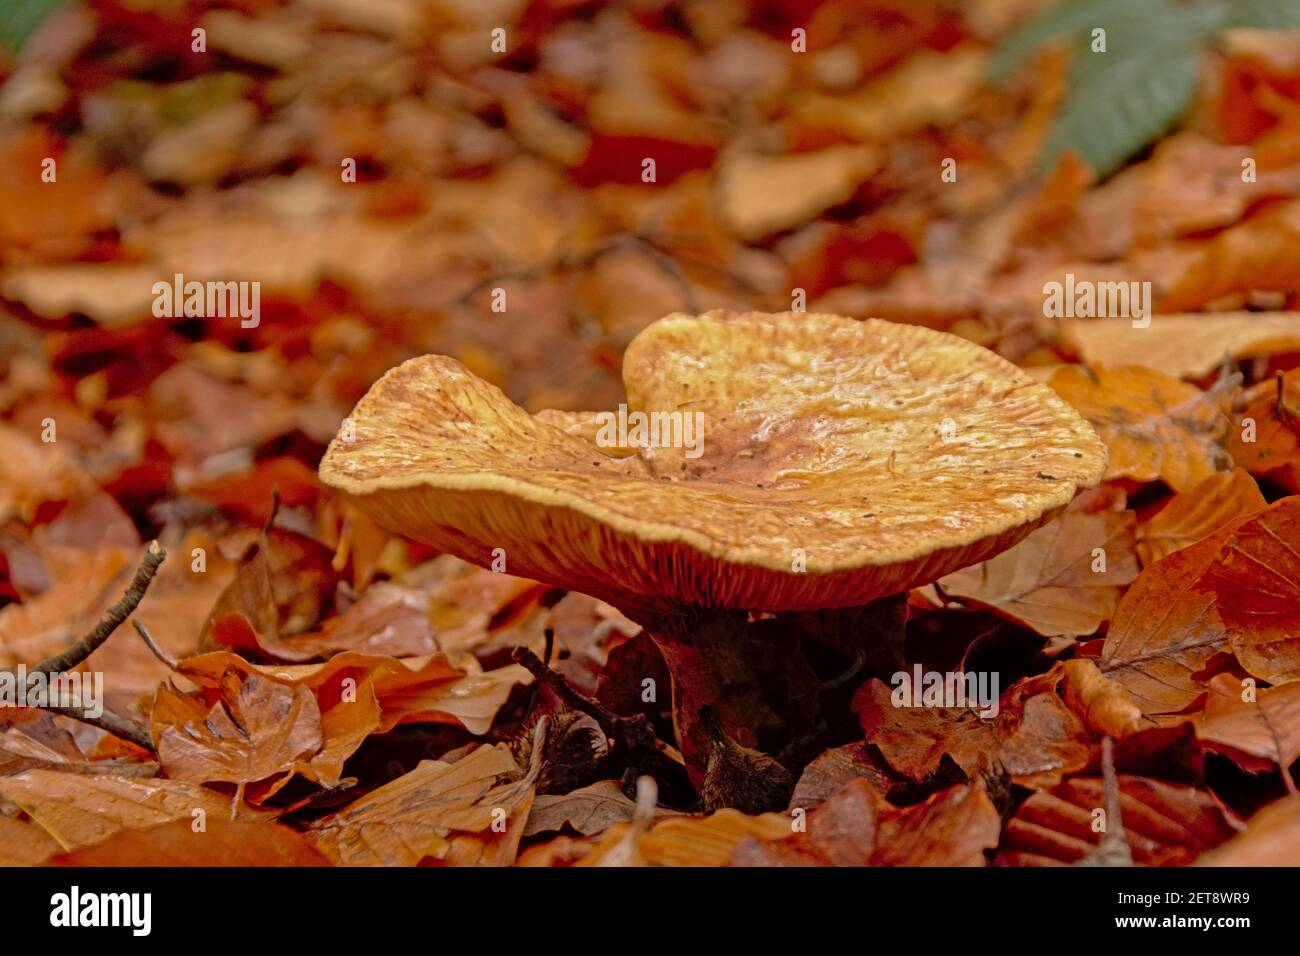 Brown russula mushroom on the forest floor Stock Photo